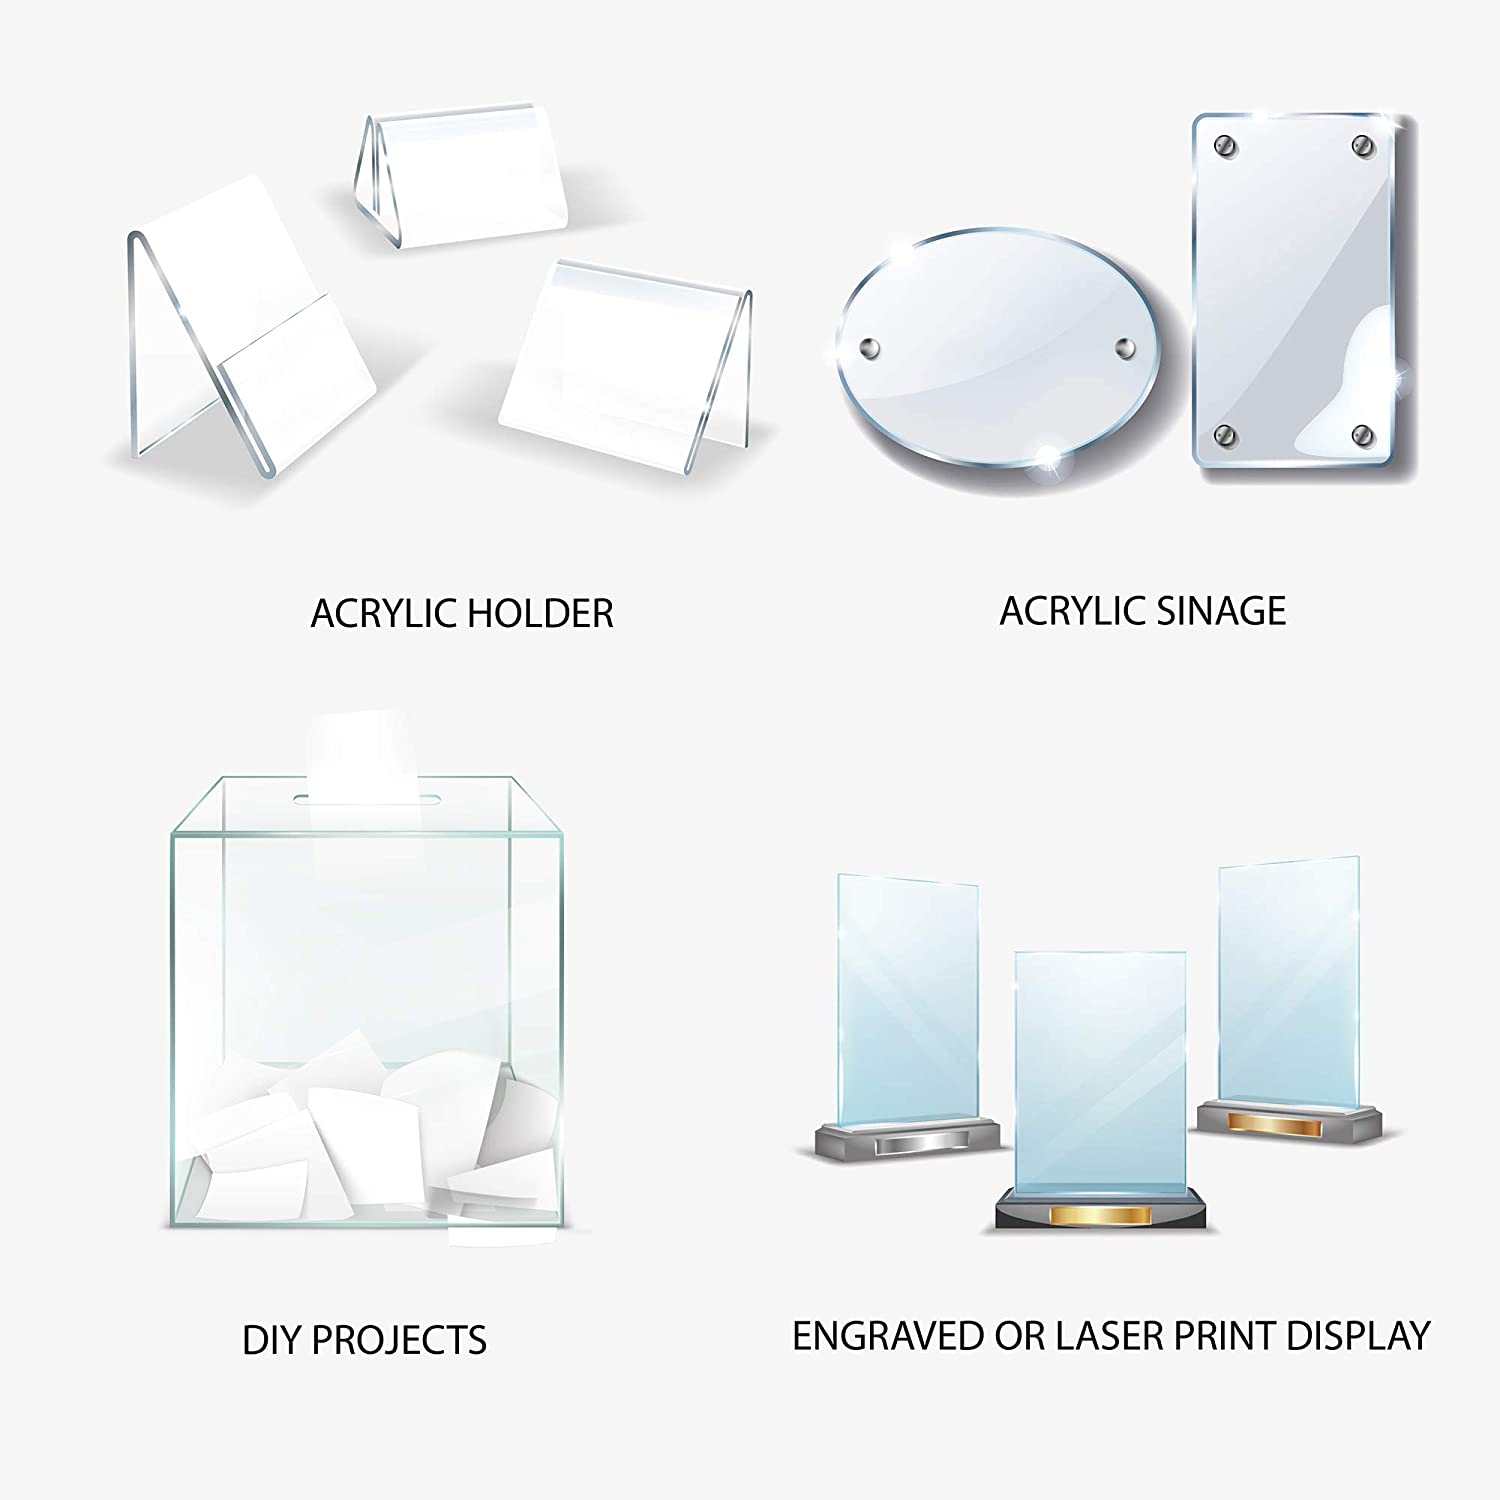 Acrylic Sheet Clear Plexiglass, 3mm (.118 Inch) Thick, 12 Inch x 12 Inch - 1 Pack